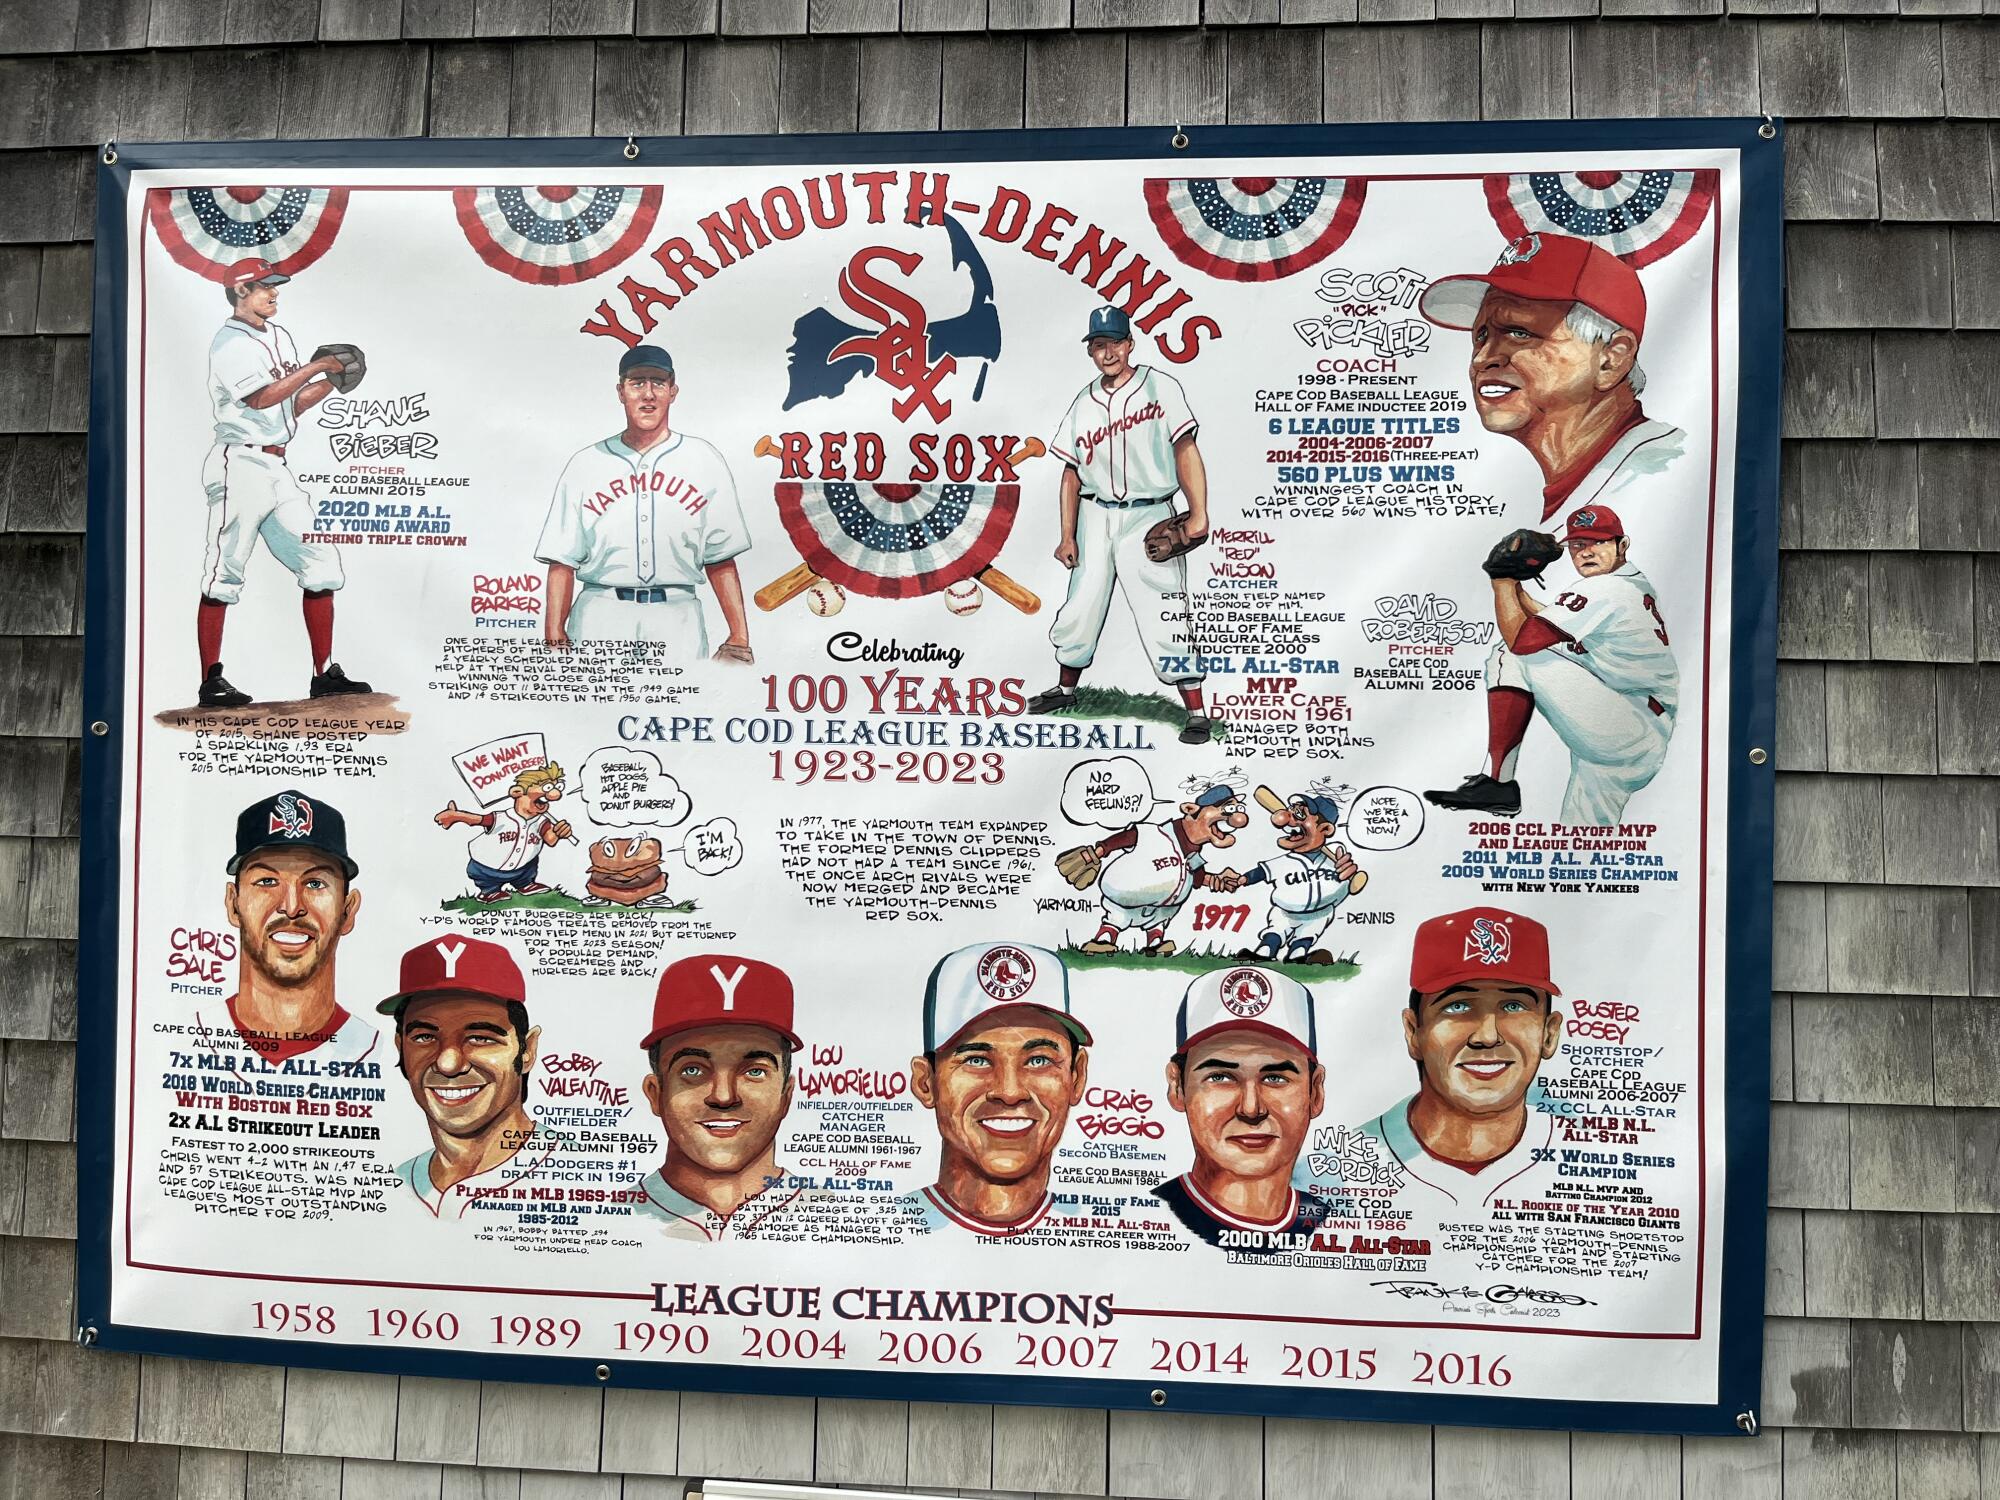 A mural displays notable figures who have been a part of the Yarmouth-Dennis Red Sox of the Cape Cod League.